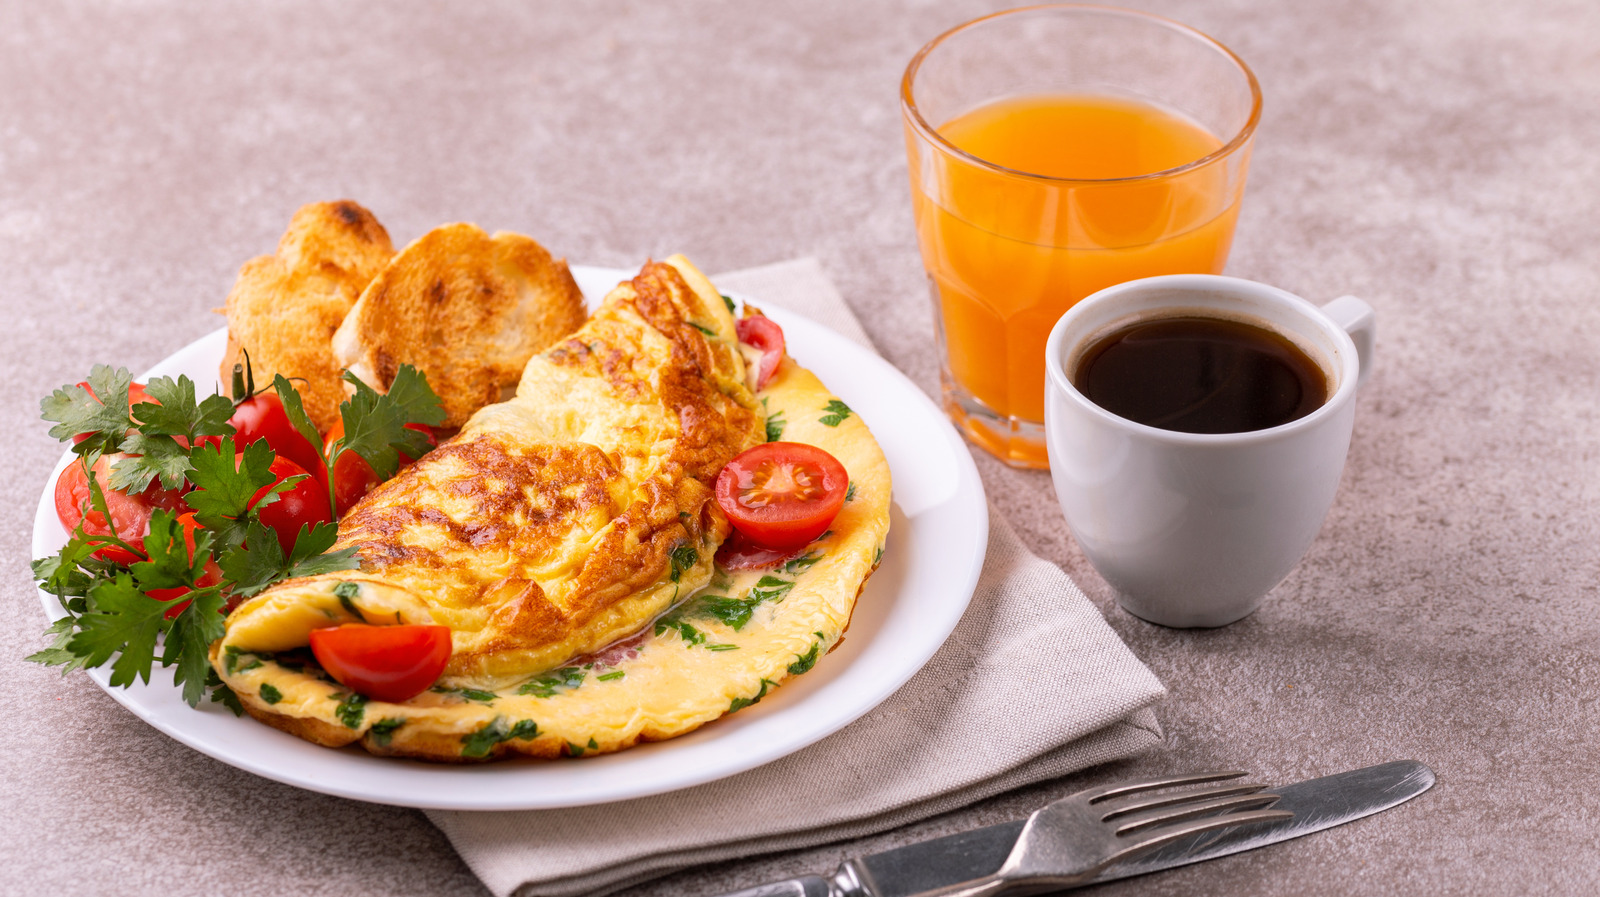 Frittata Vs. Omelet: Is There A Real Difference? - Tasting Table